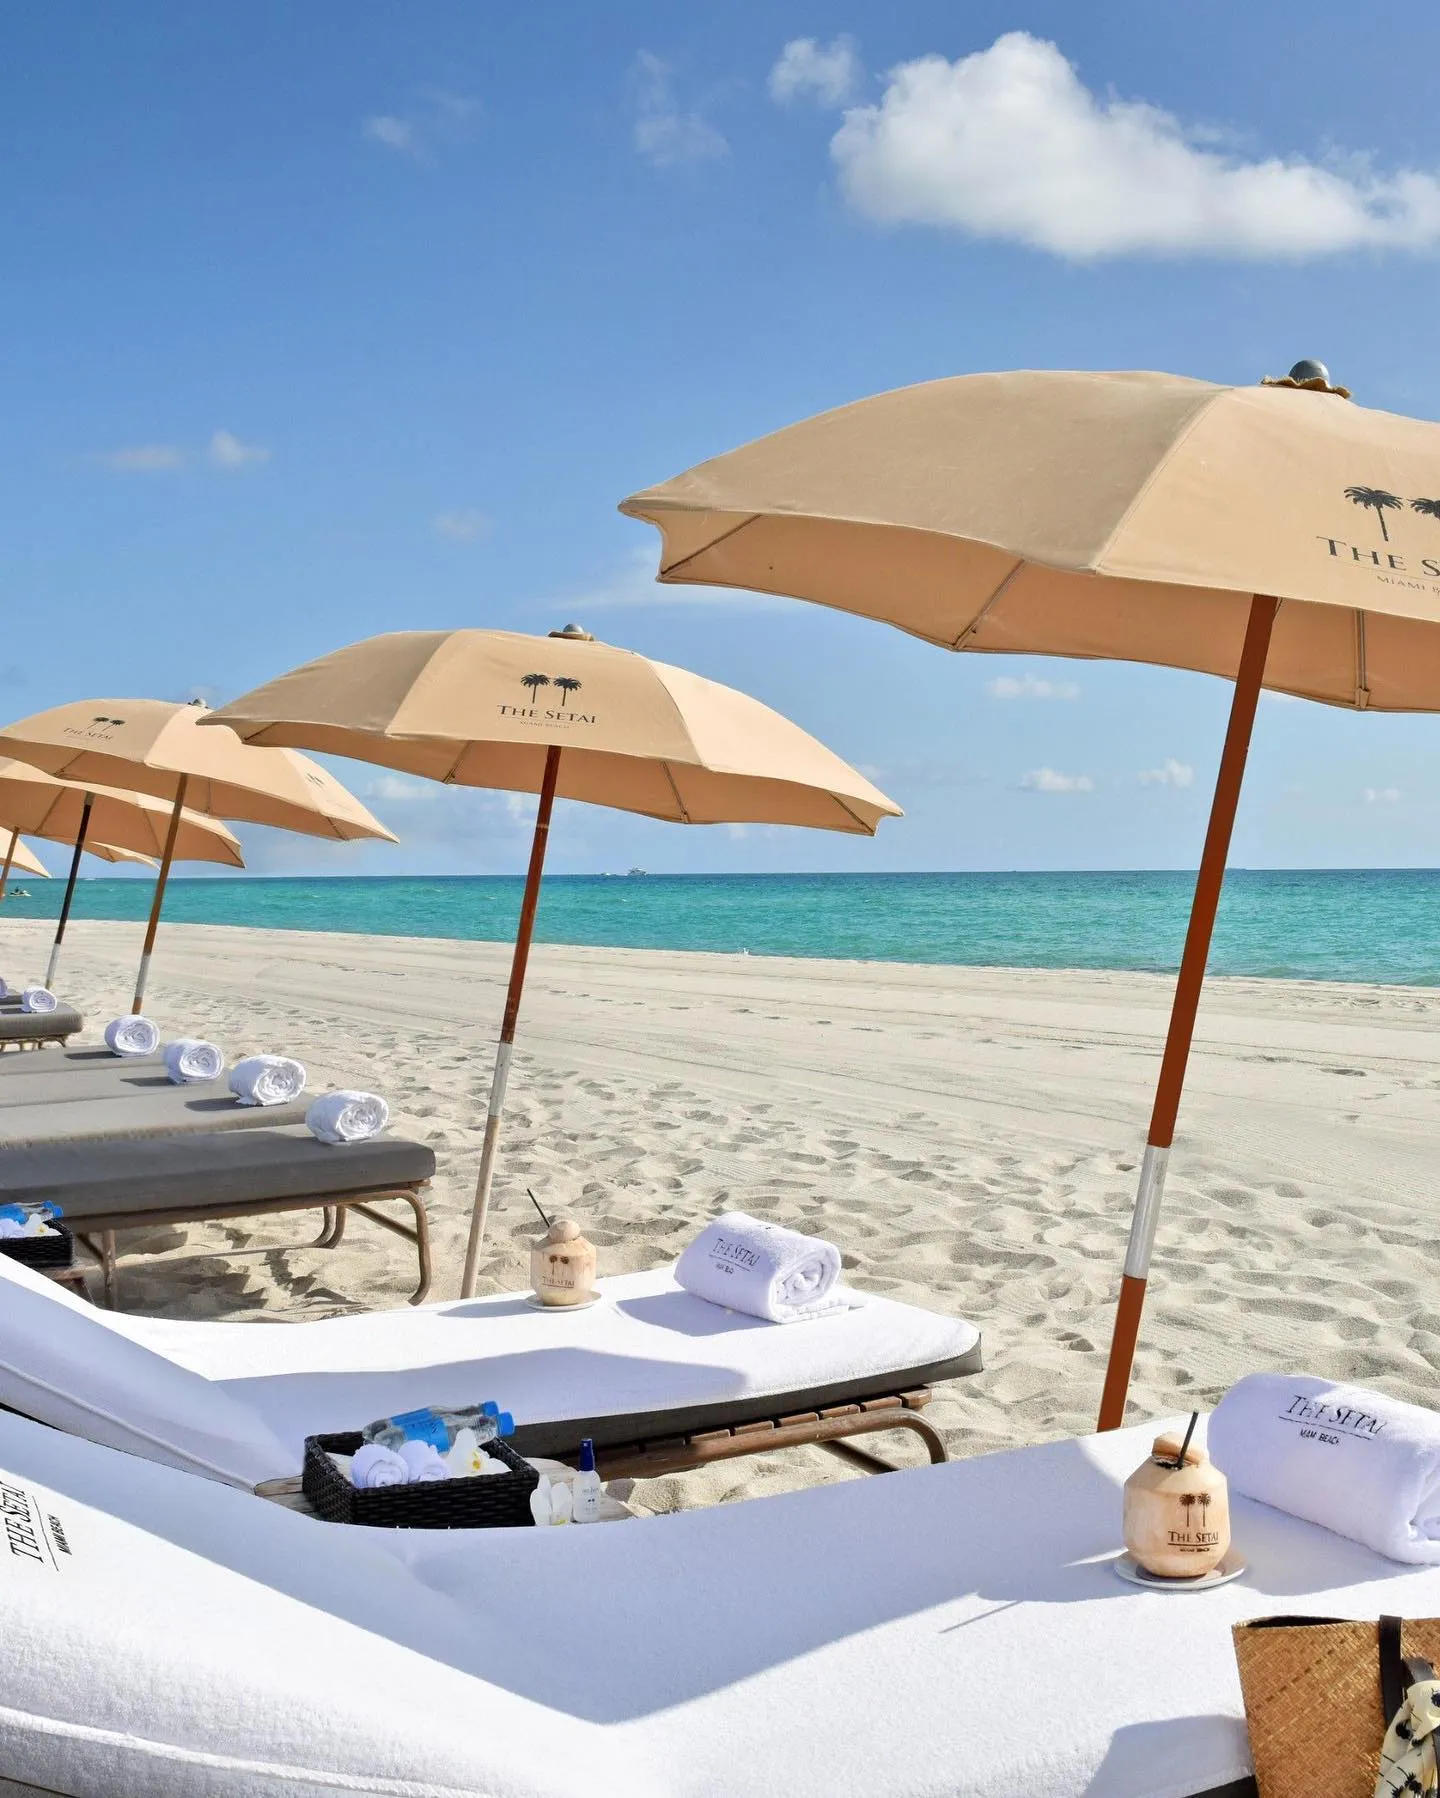 The Setai, Miami Beach - Bask in endless summer days with the Florida Resident Offer